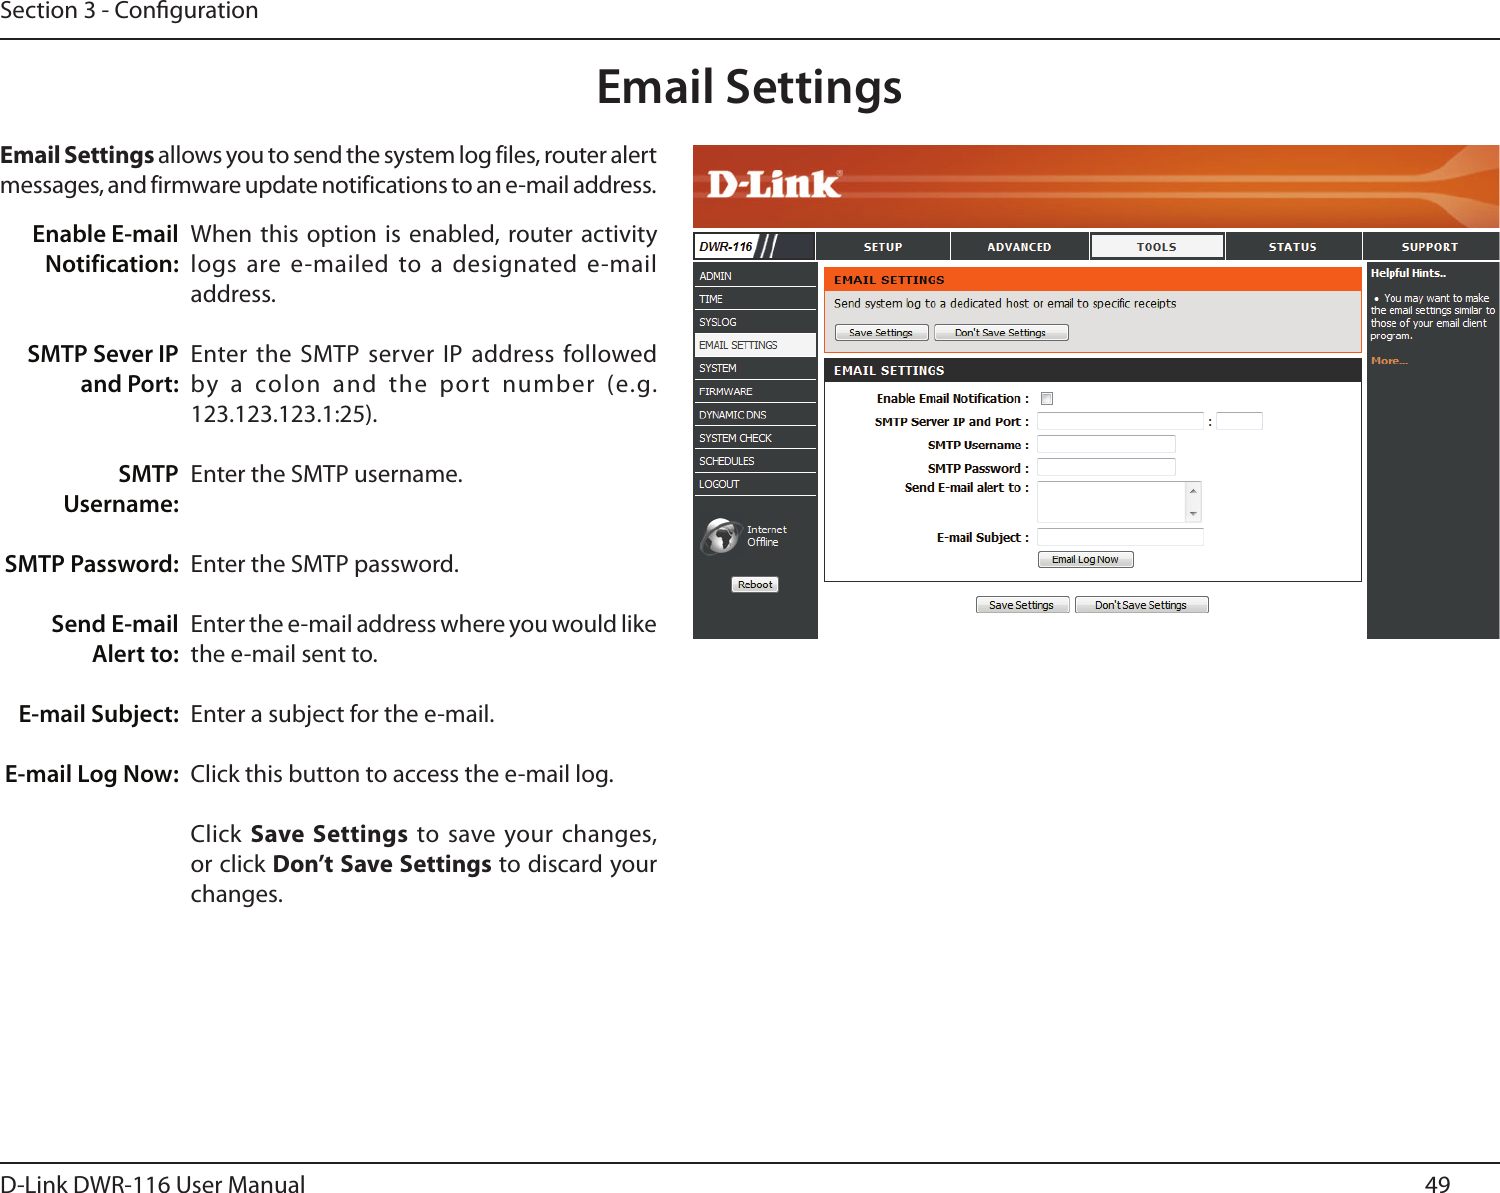 49D-Link DWR-116 User ManualSection 3 - CongurationEmail SettingsWhen this option is  enabled, router activity logs are e-mailed to a designated e-mail address.Enter the SMTP server IP address followed by  a  colon  and  the  port  number  (e.g. 123.123.123.1:25).Enter the SMTP username.Enter the SMTP password.Enter the e-mail address where you would like the e-mail sent to.Enter a subject for the e-mail.Click this button to access the e-mail log.Click Save  Settings  to save your changes, or click Don’t Save Settings to discard your changes.Enable E-mail Notification:SMTP Sever IP and Port:SMTP Username:SMTP Password:  Send E-mail Alert to:E-mail Subject:E-mail Log Now:Email Settings allows you to send the system log files, router alert messages, and firmware update notifications to an e-mail address.